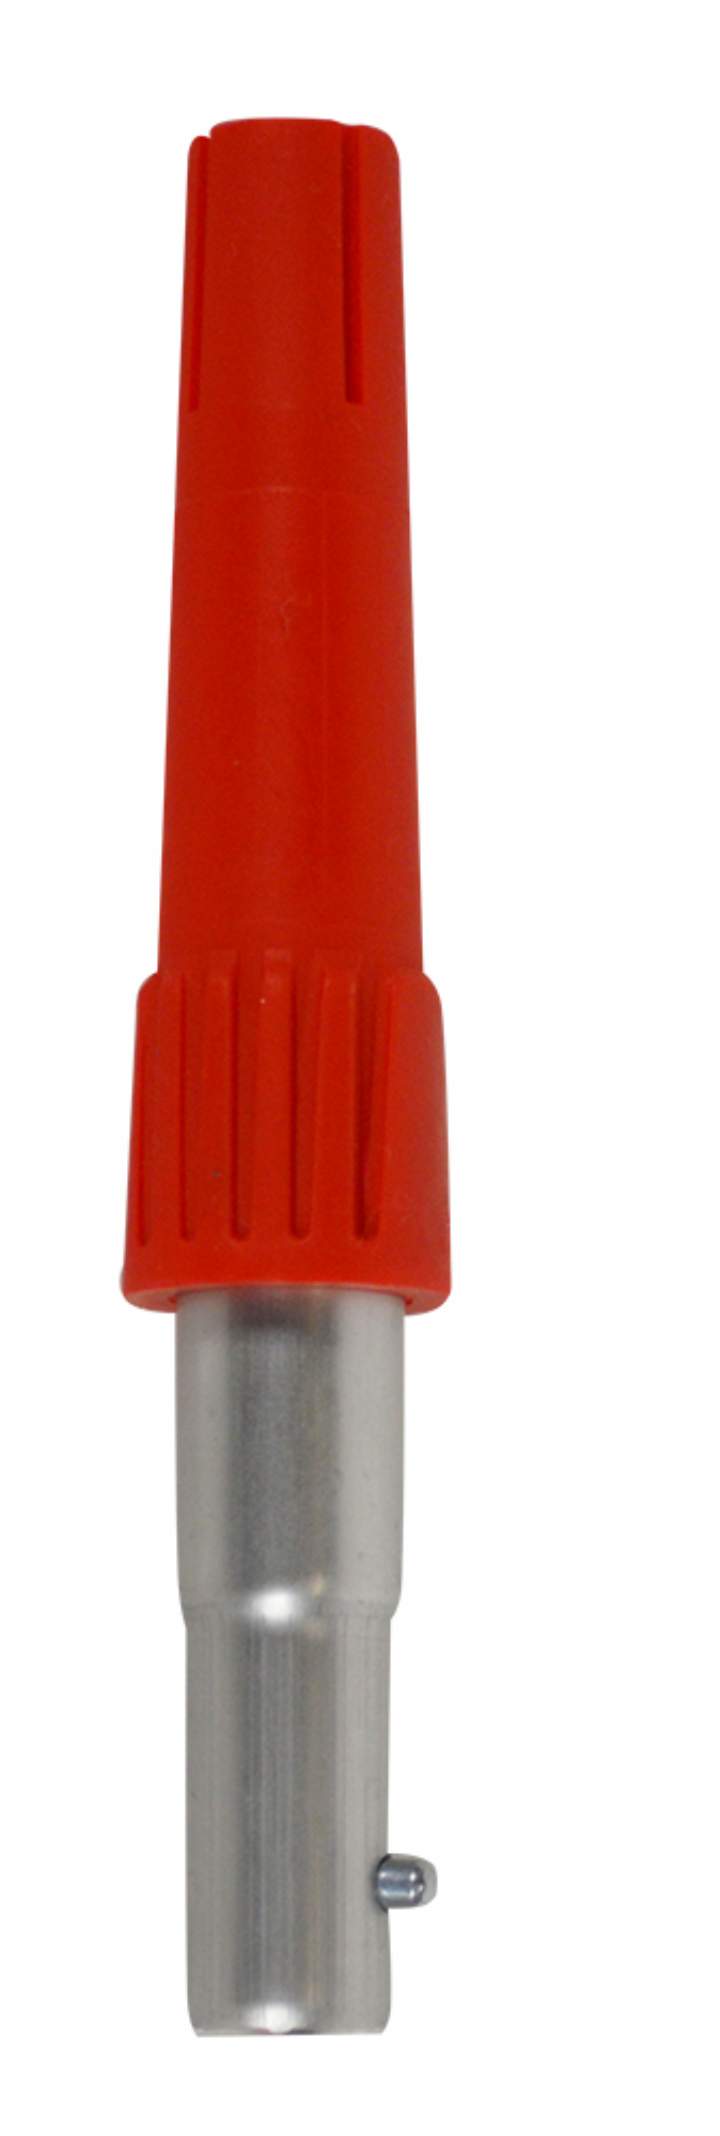 RED CONE FOR NORMAL EXTENDING POLES - Each